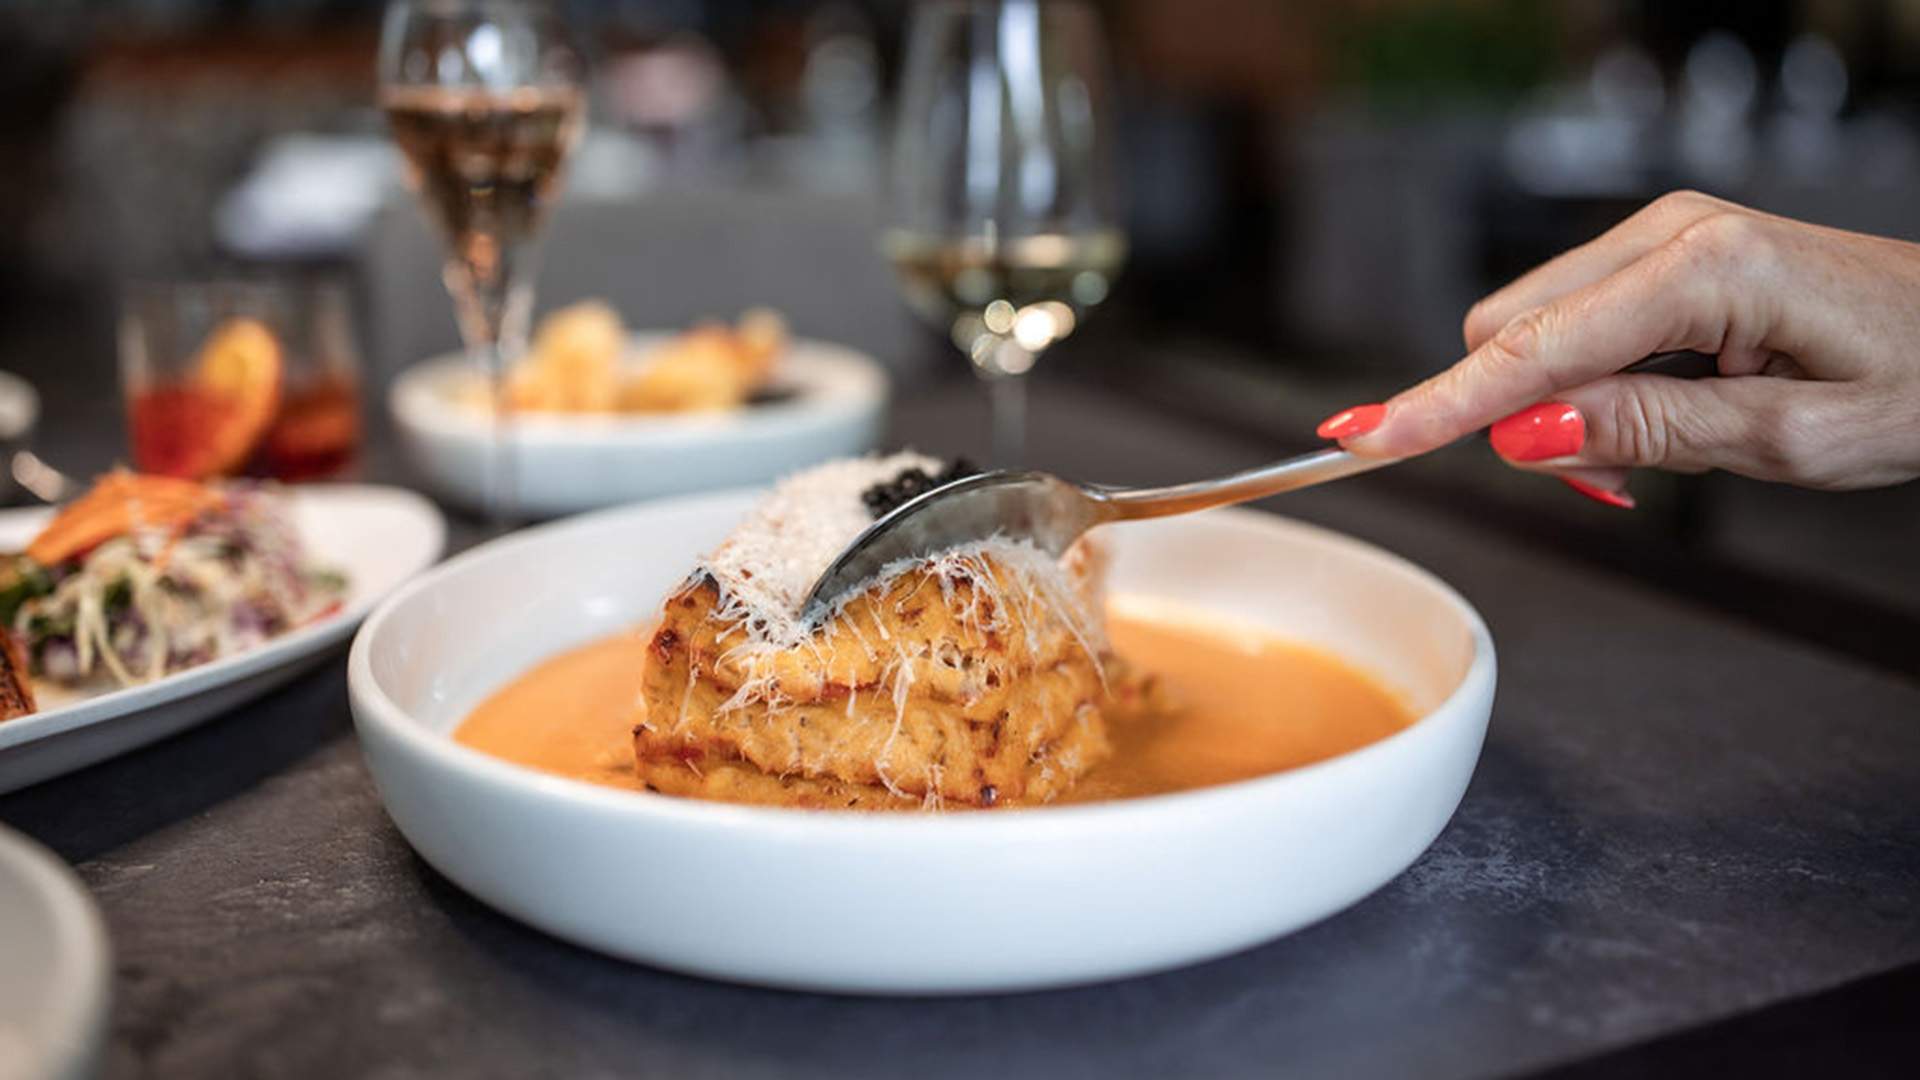 Now Open: Zazu Dining & Bar Is the New West End Restaurant Serving Up Gillian Hirst's Sand Crab Lasagne